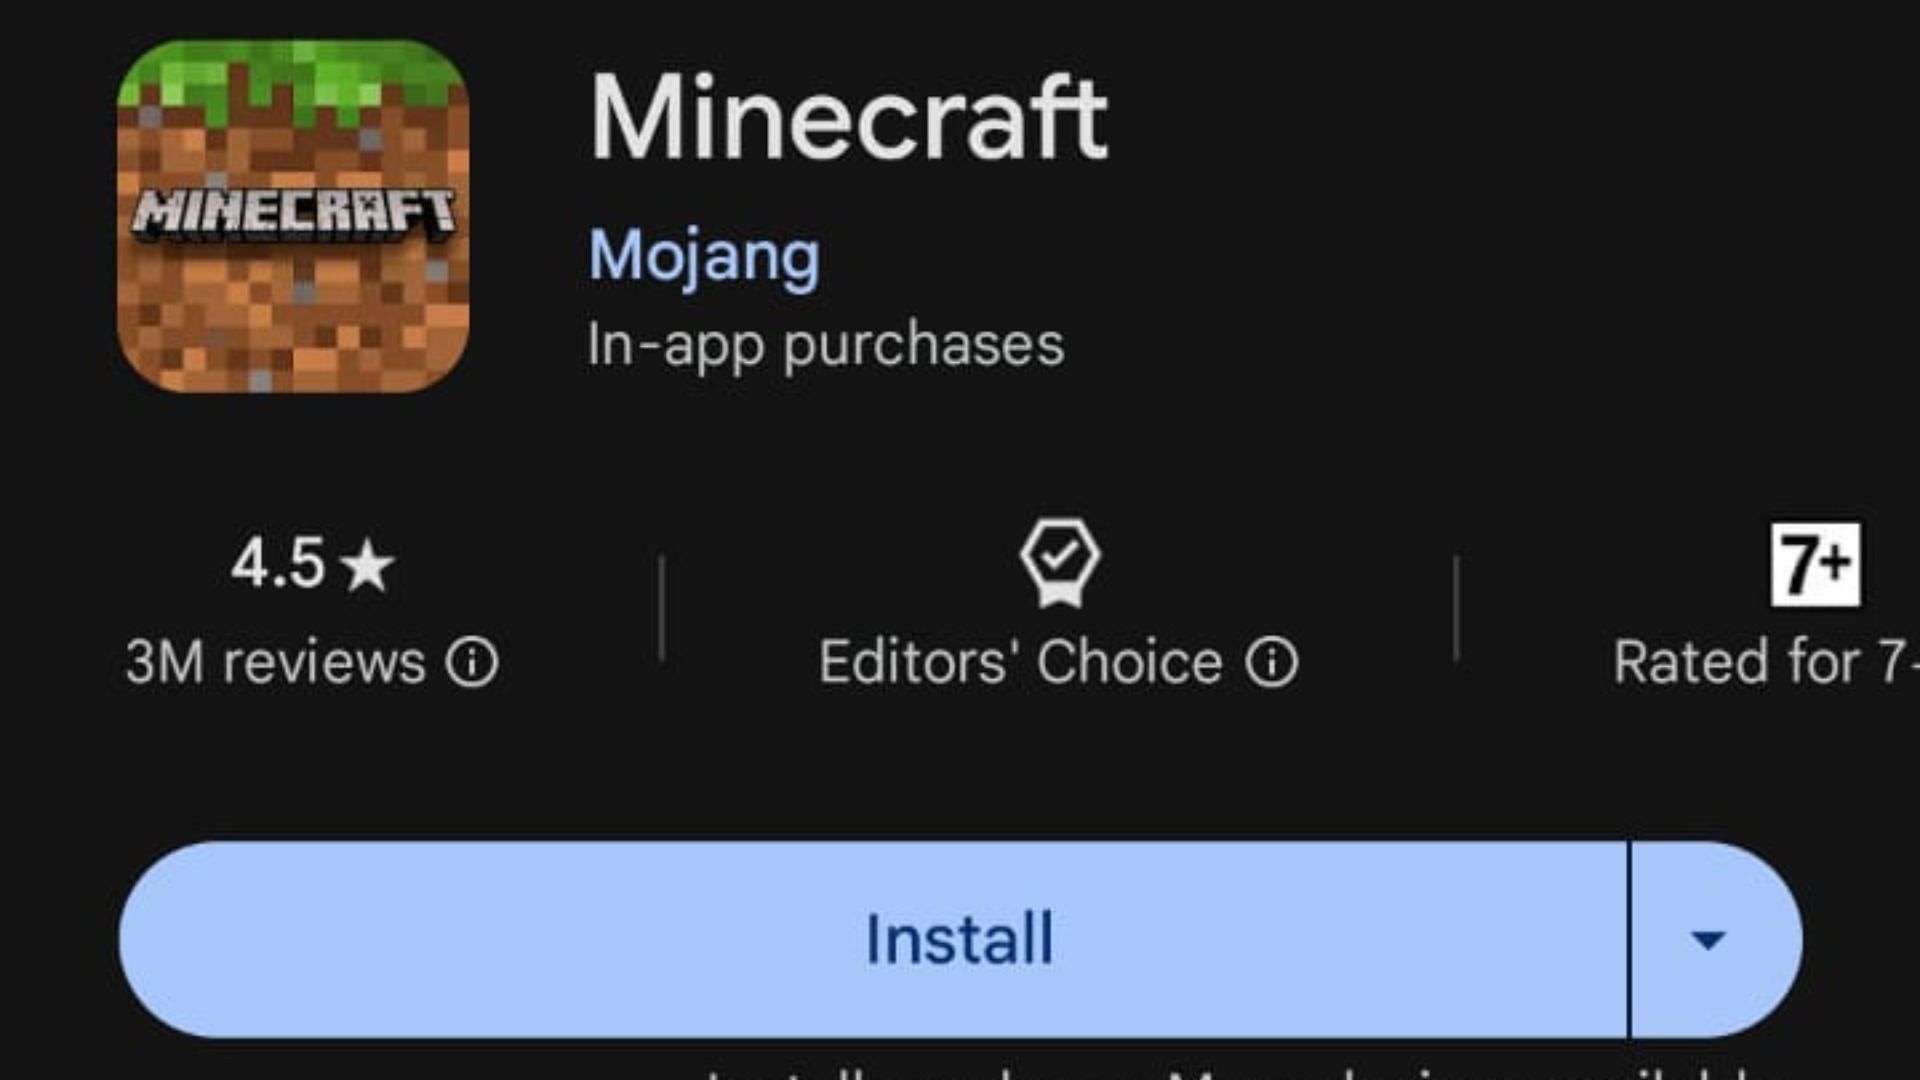 Download page for the updated Minecraft game on PlayStore (Image via Google PlayStore)